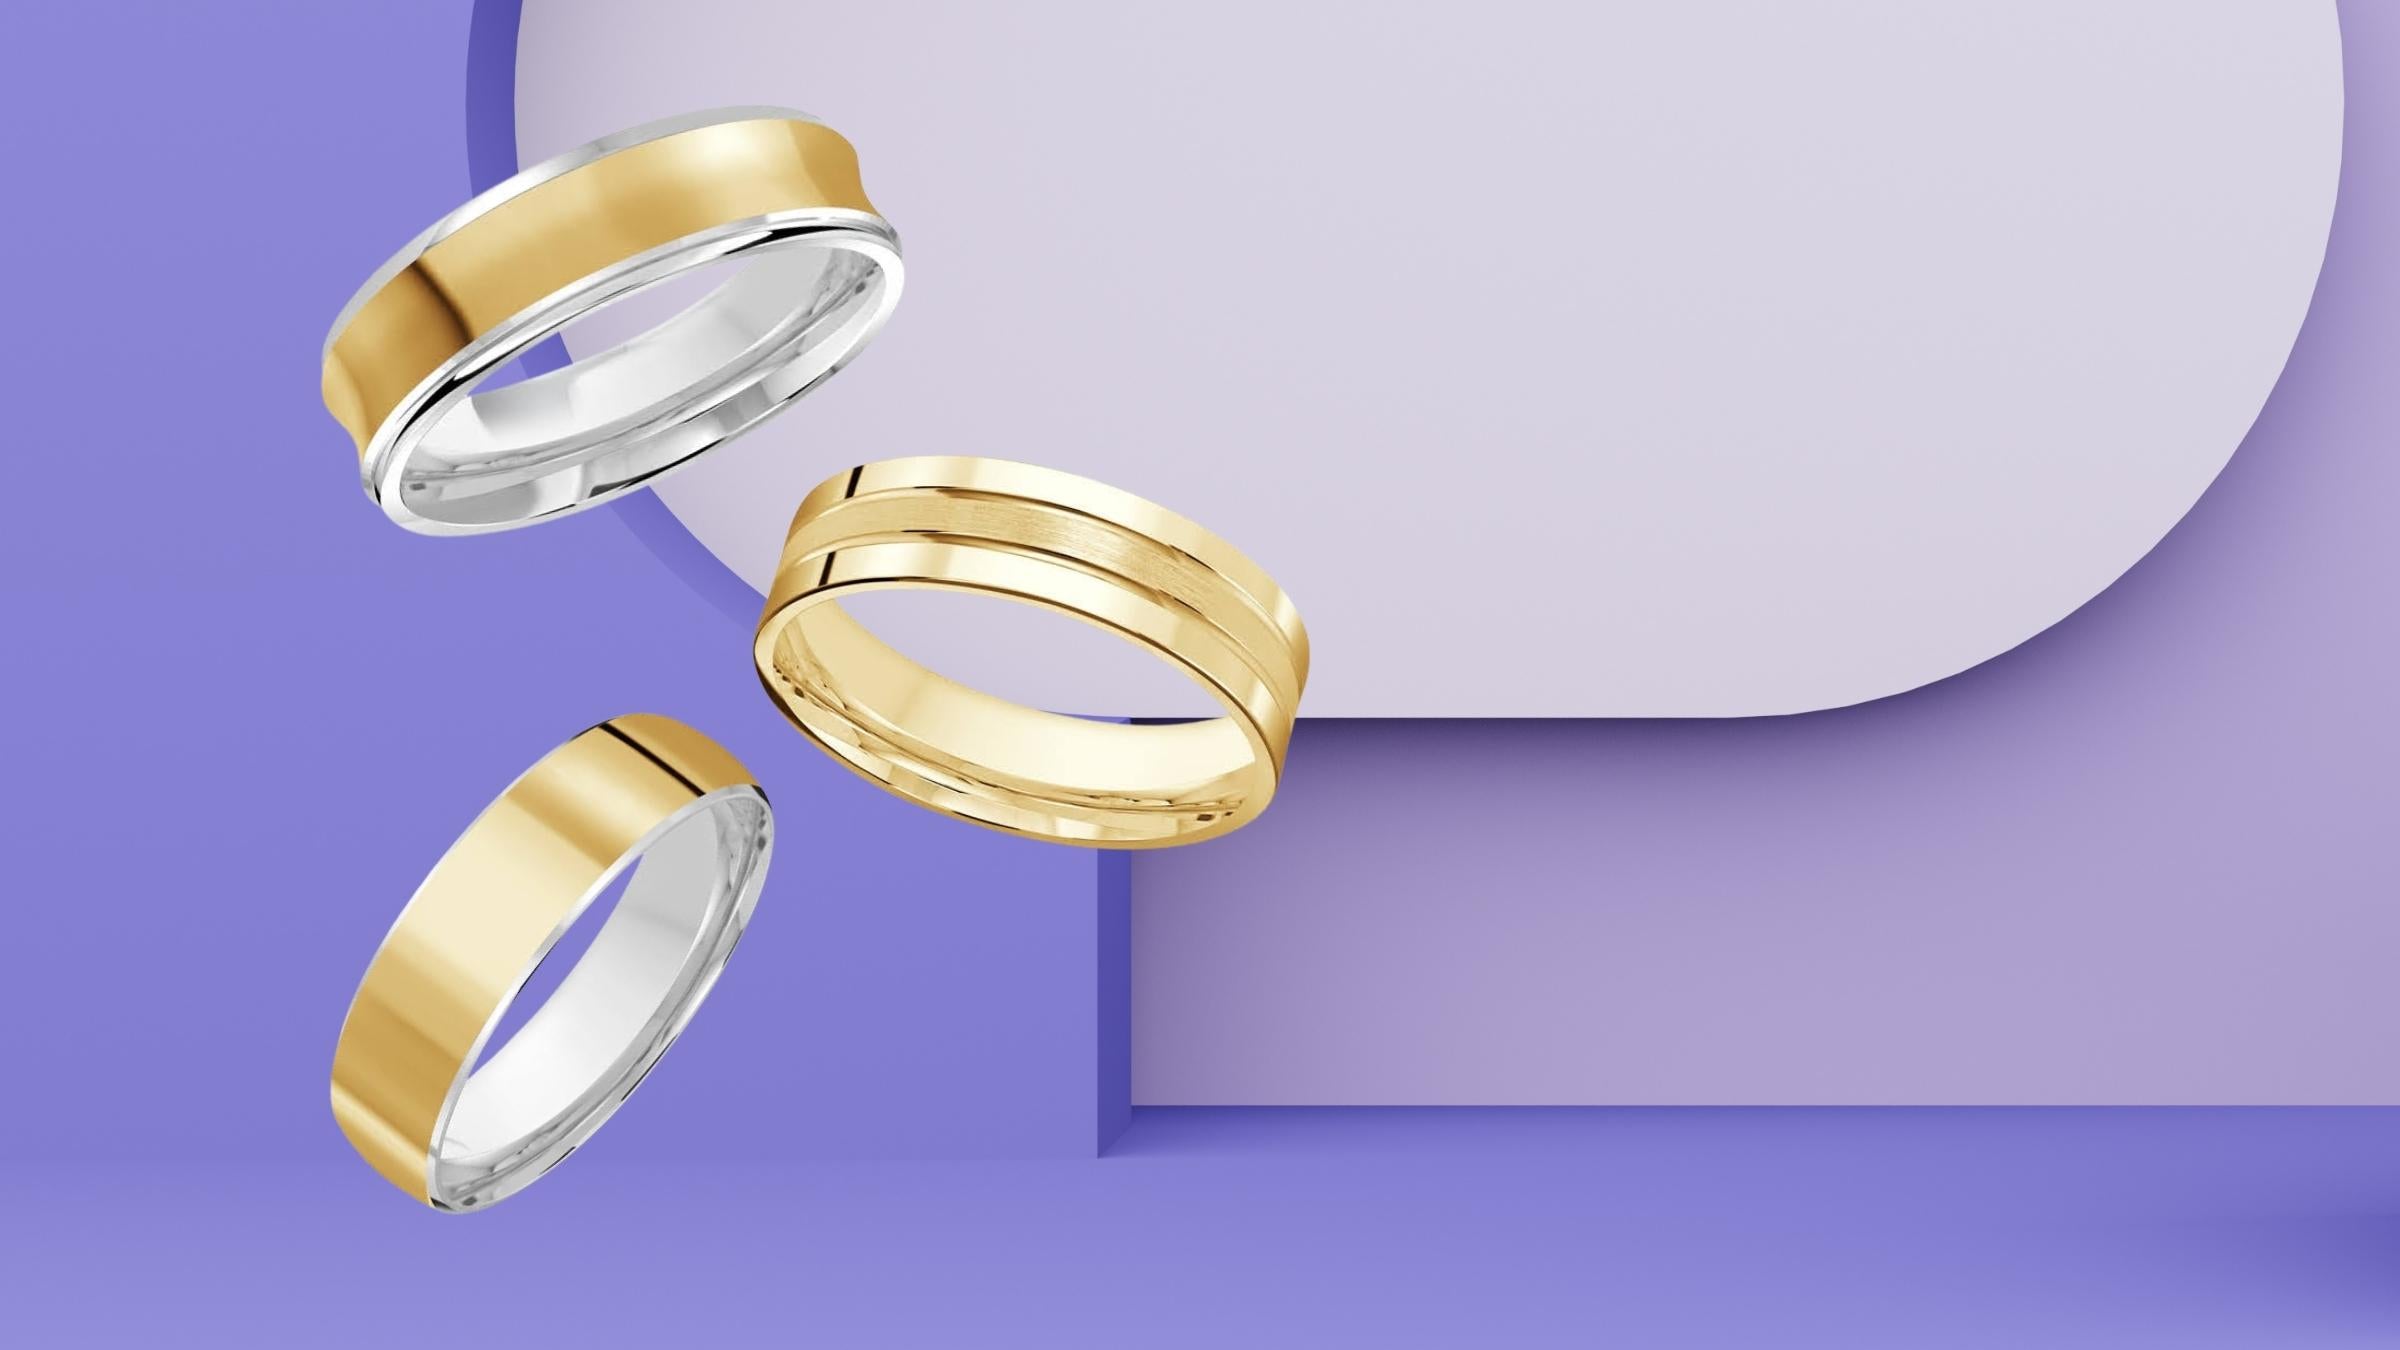 3 Gold Bands on Purple Background